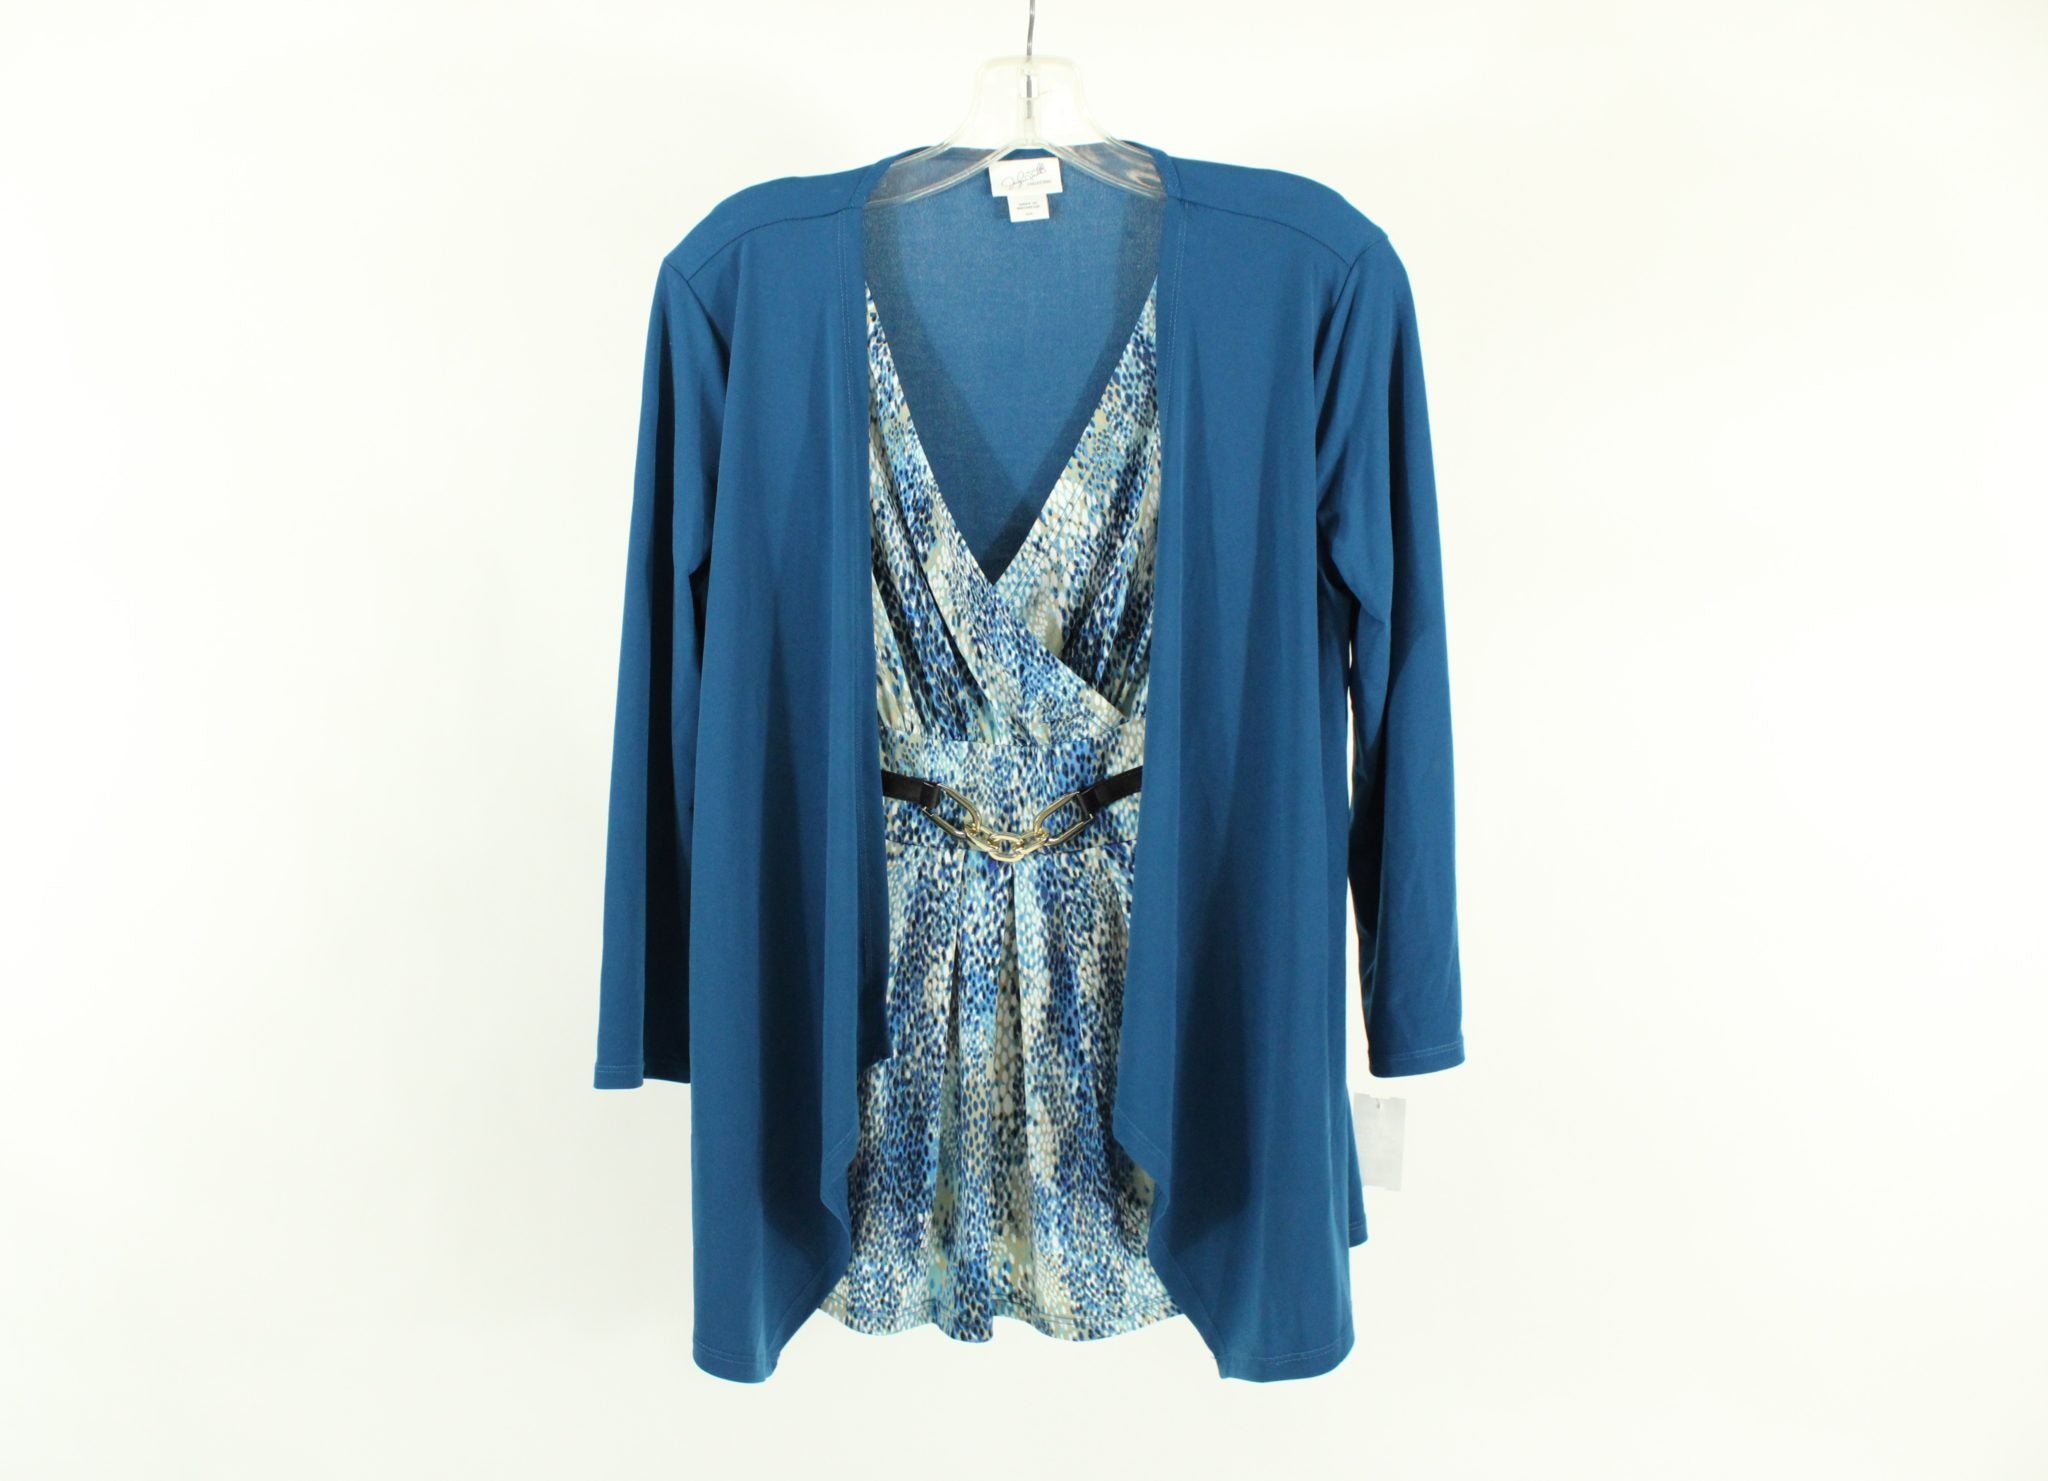 Jaclyn Smith Belted Blue Top | Size S